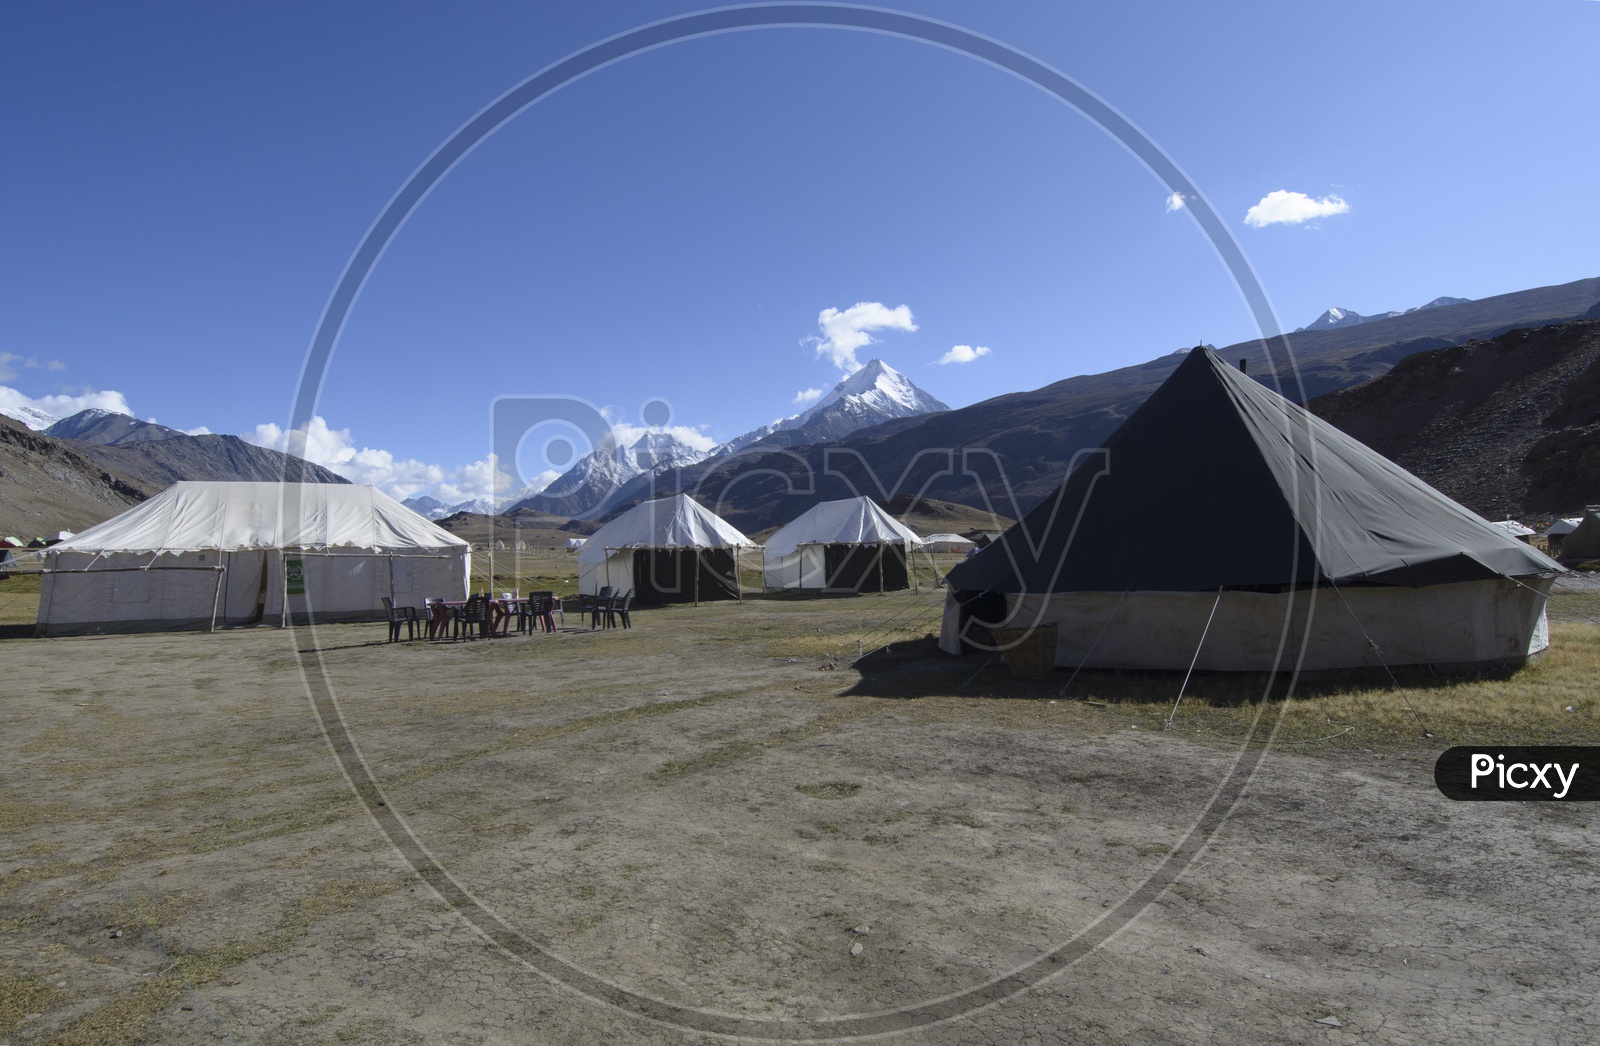 Tents Or Camps or Shelters Arranged  With Snow Capped Mountain Views For Tourists in Ladakh